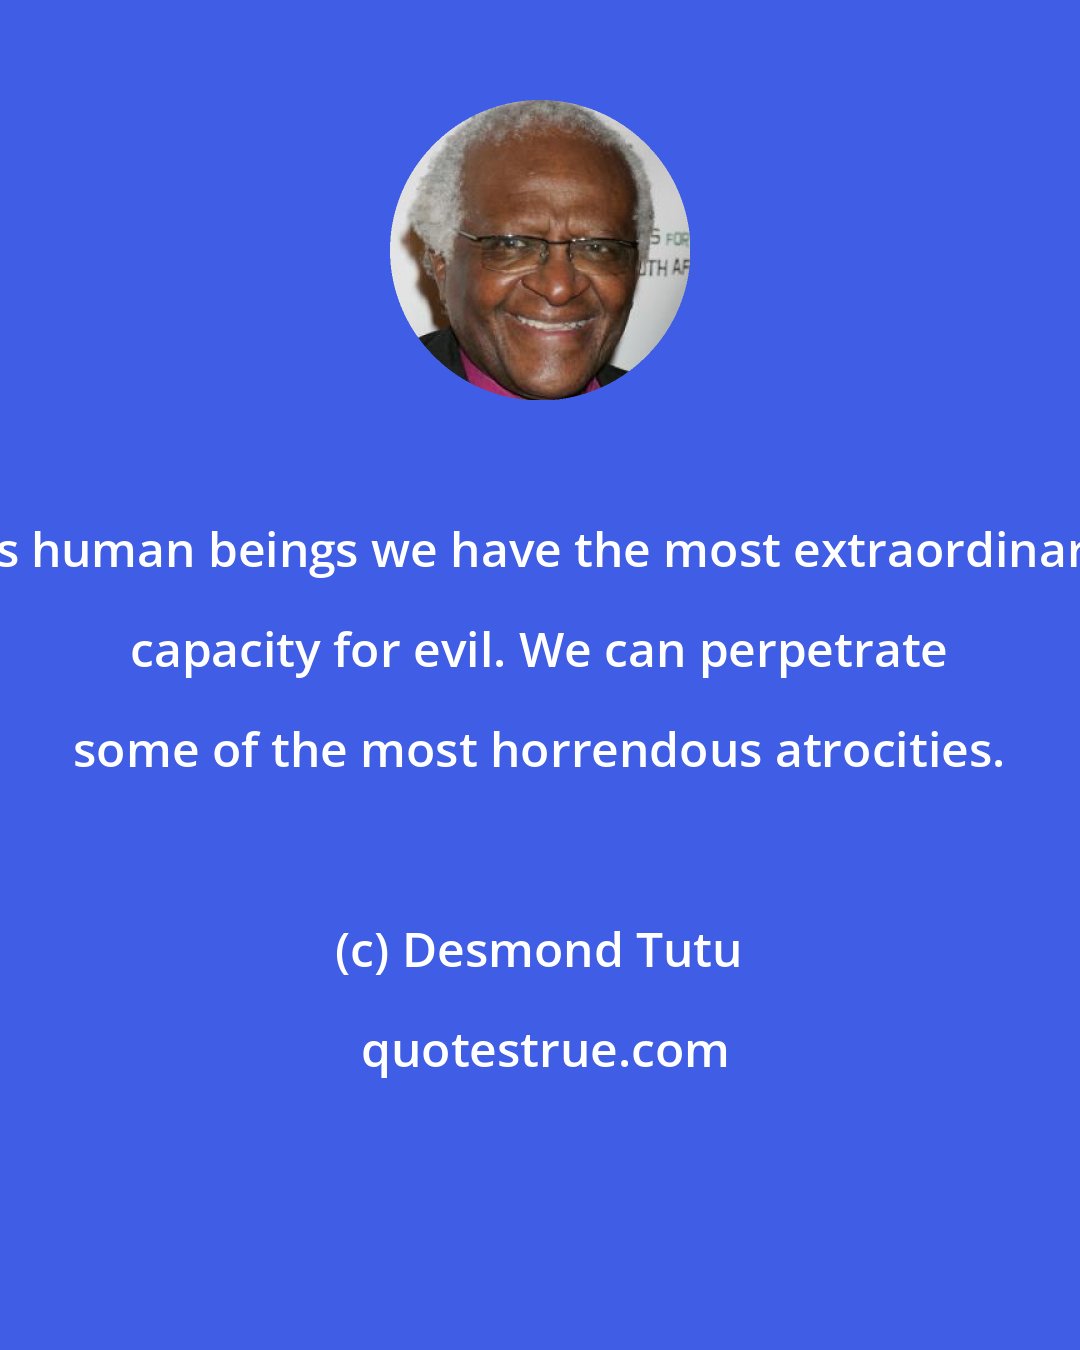 Desmond Tutu: As human beings we have the most extraordinary capacity for evil. We can perpetrate some of the most horrendous atrocities.